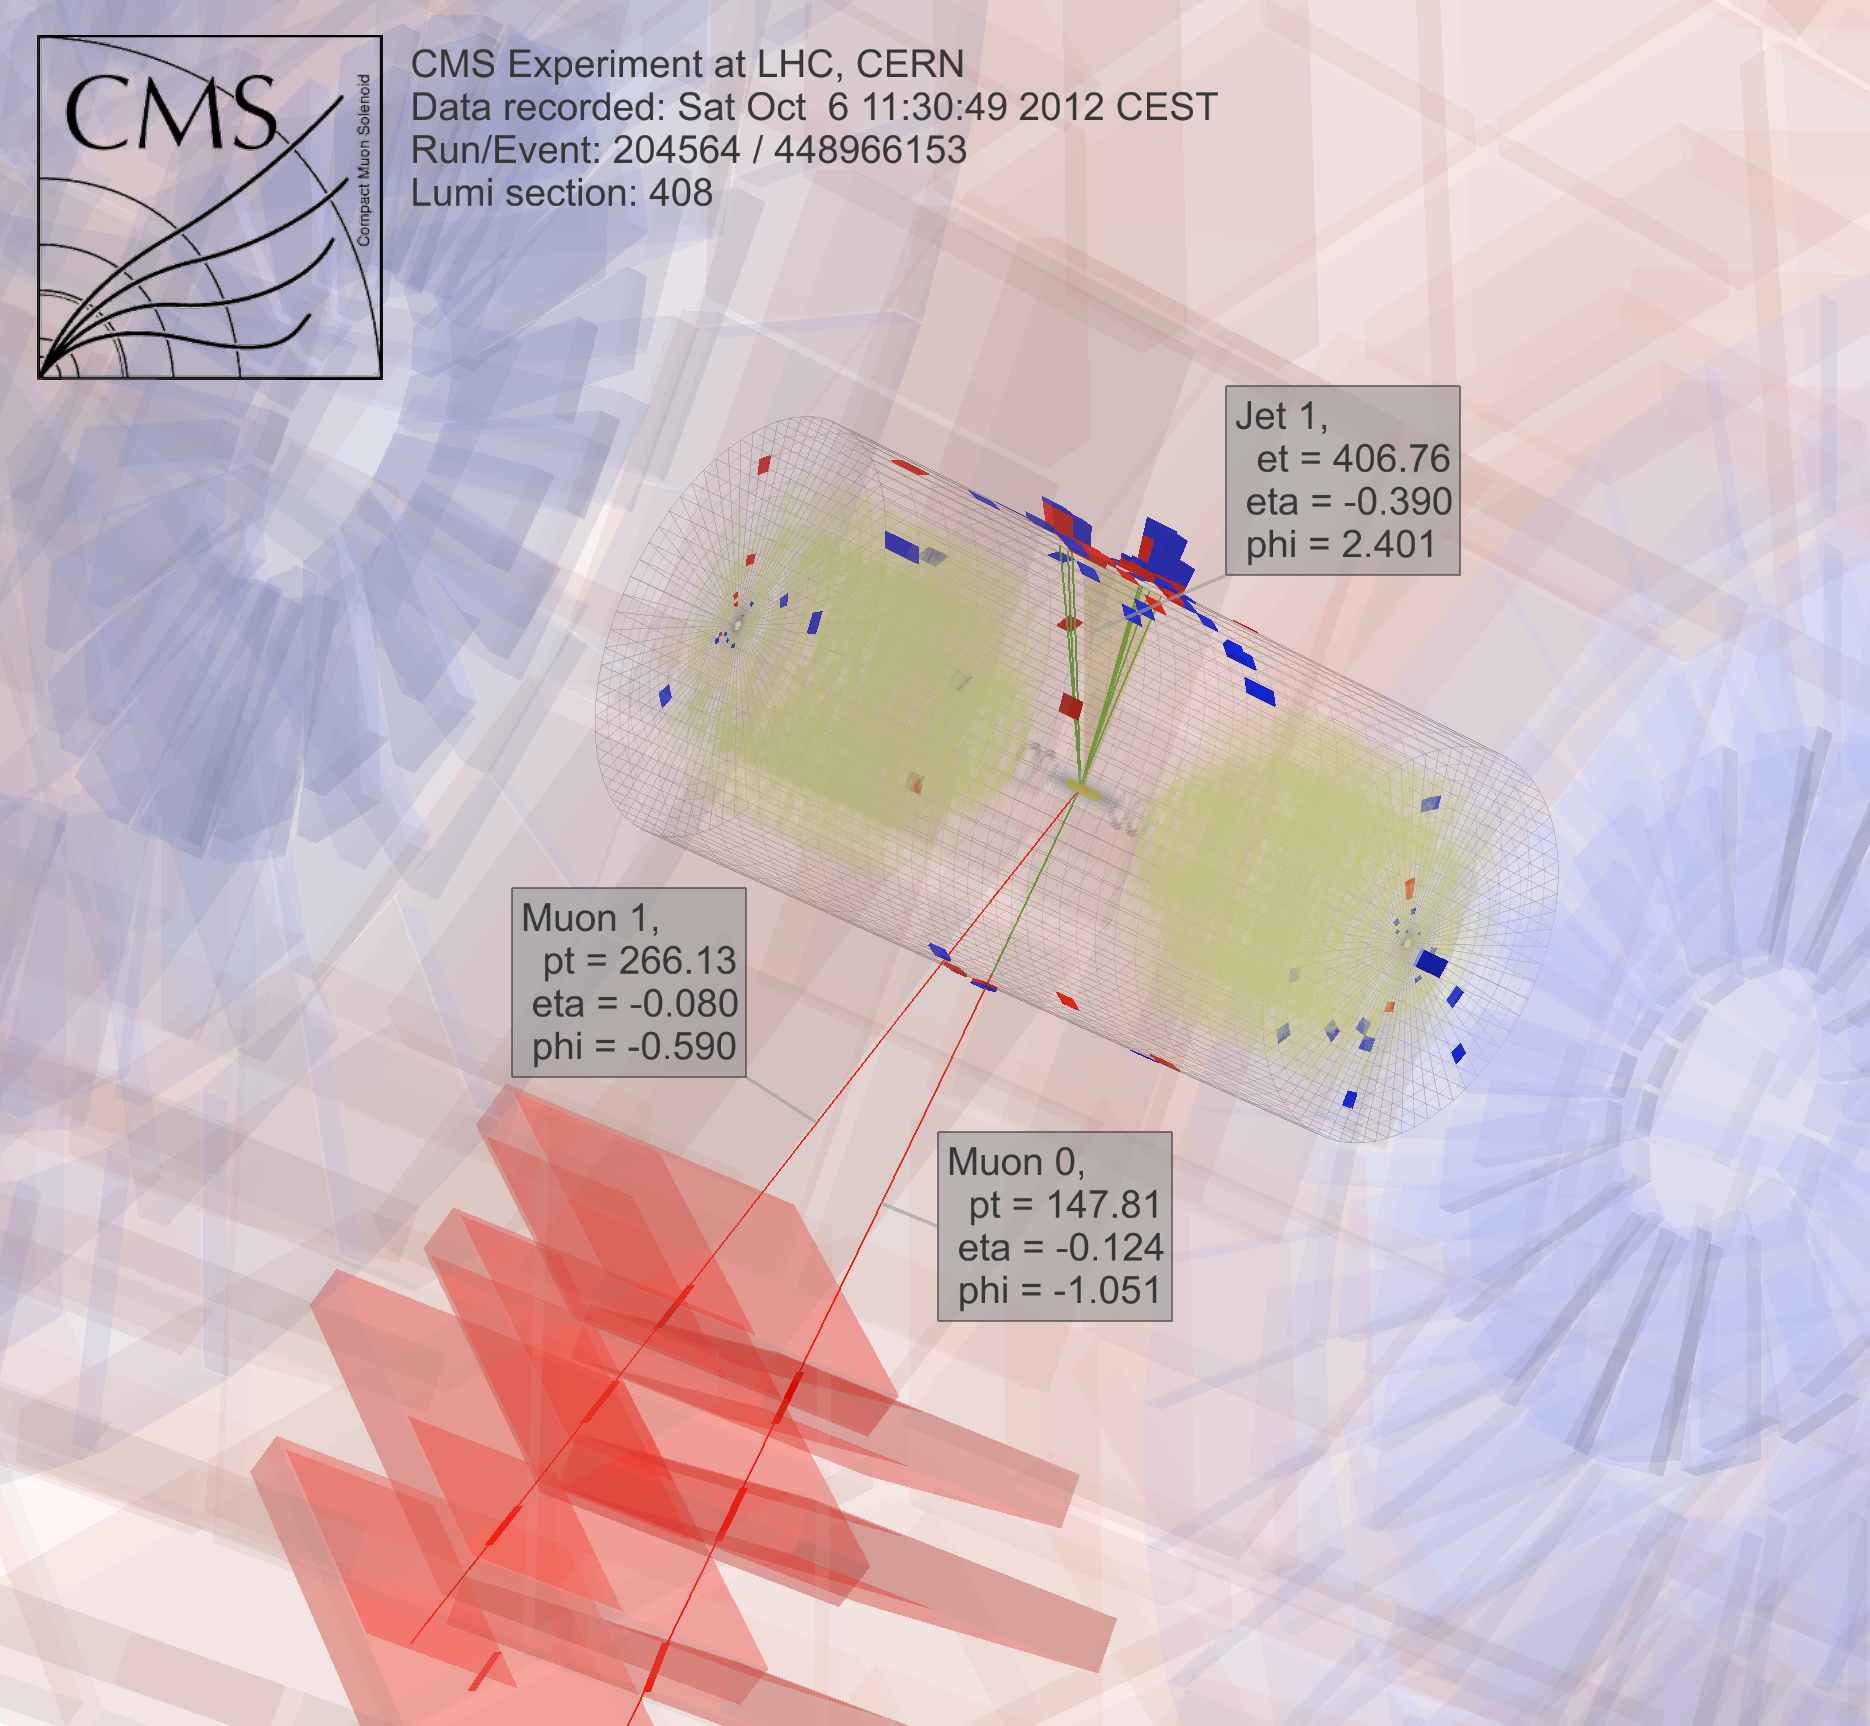 CMS Experiment image